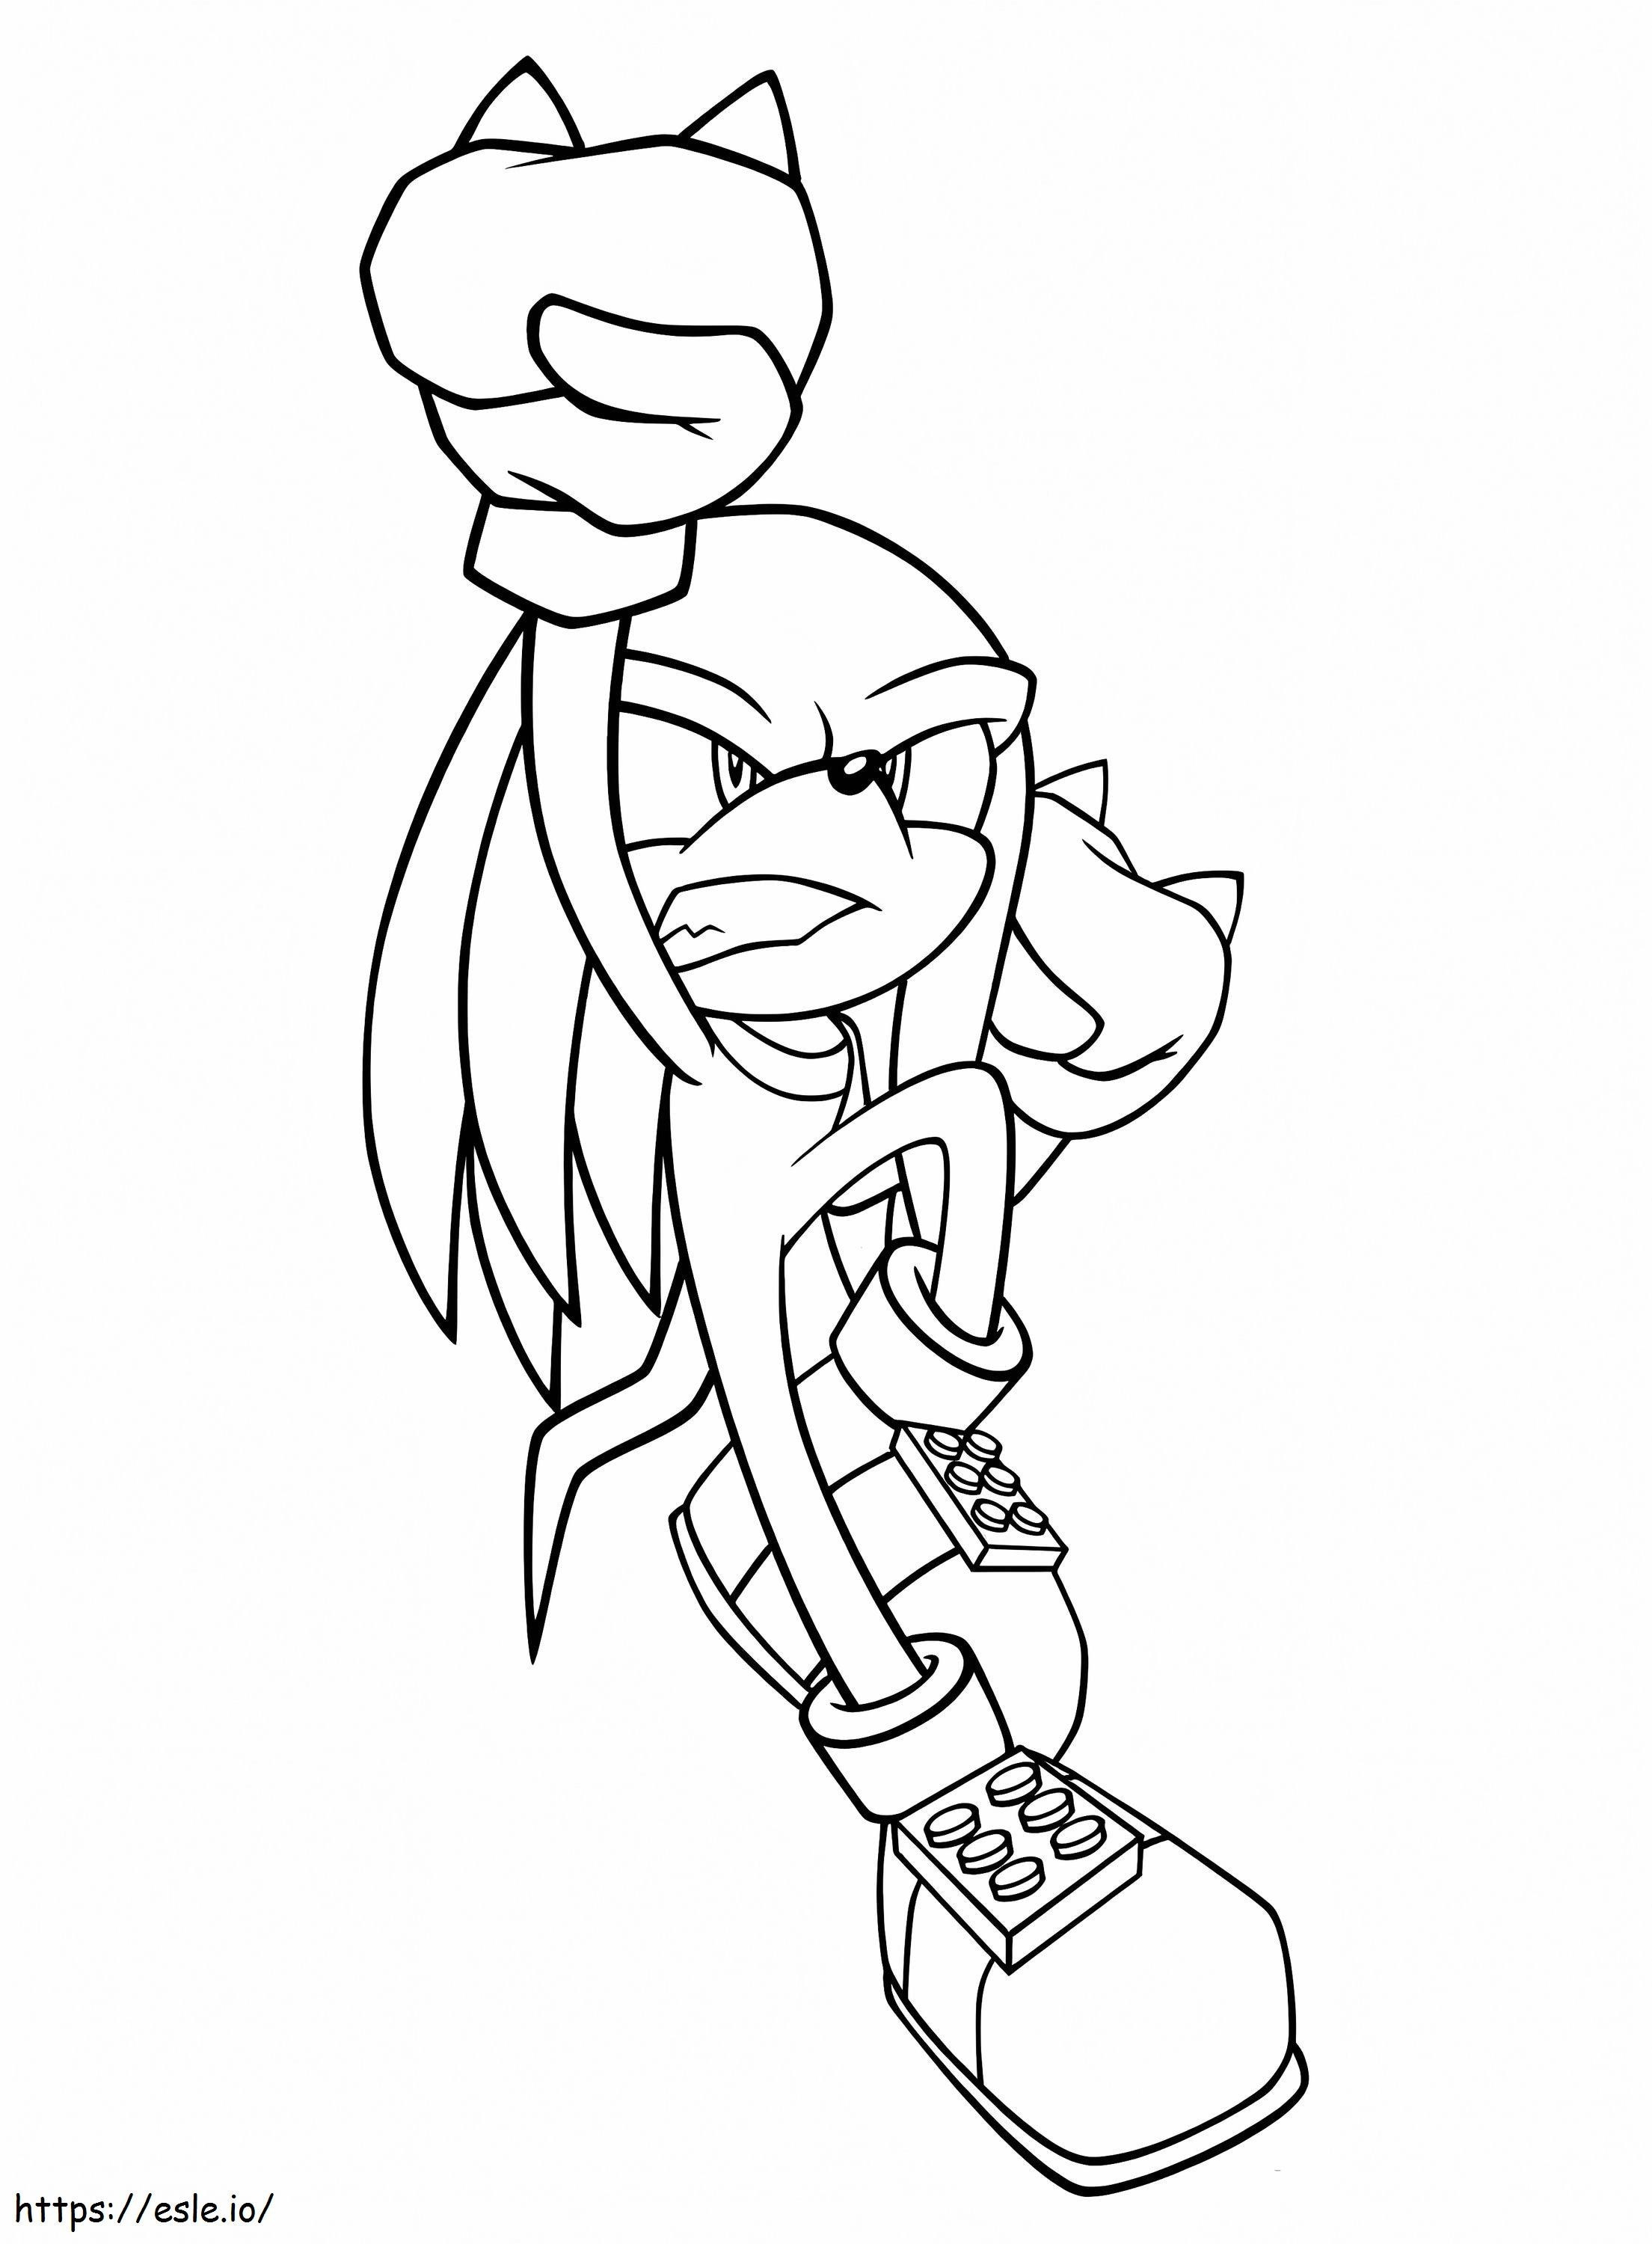 Knuckles The Echidna Punching coloring page